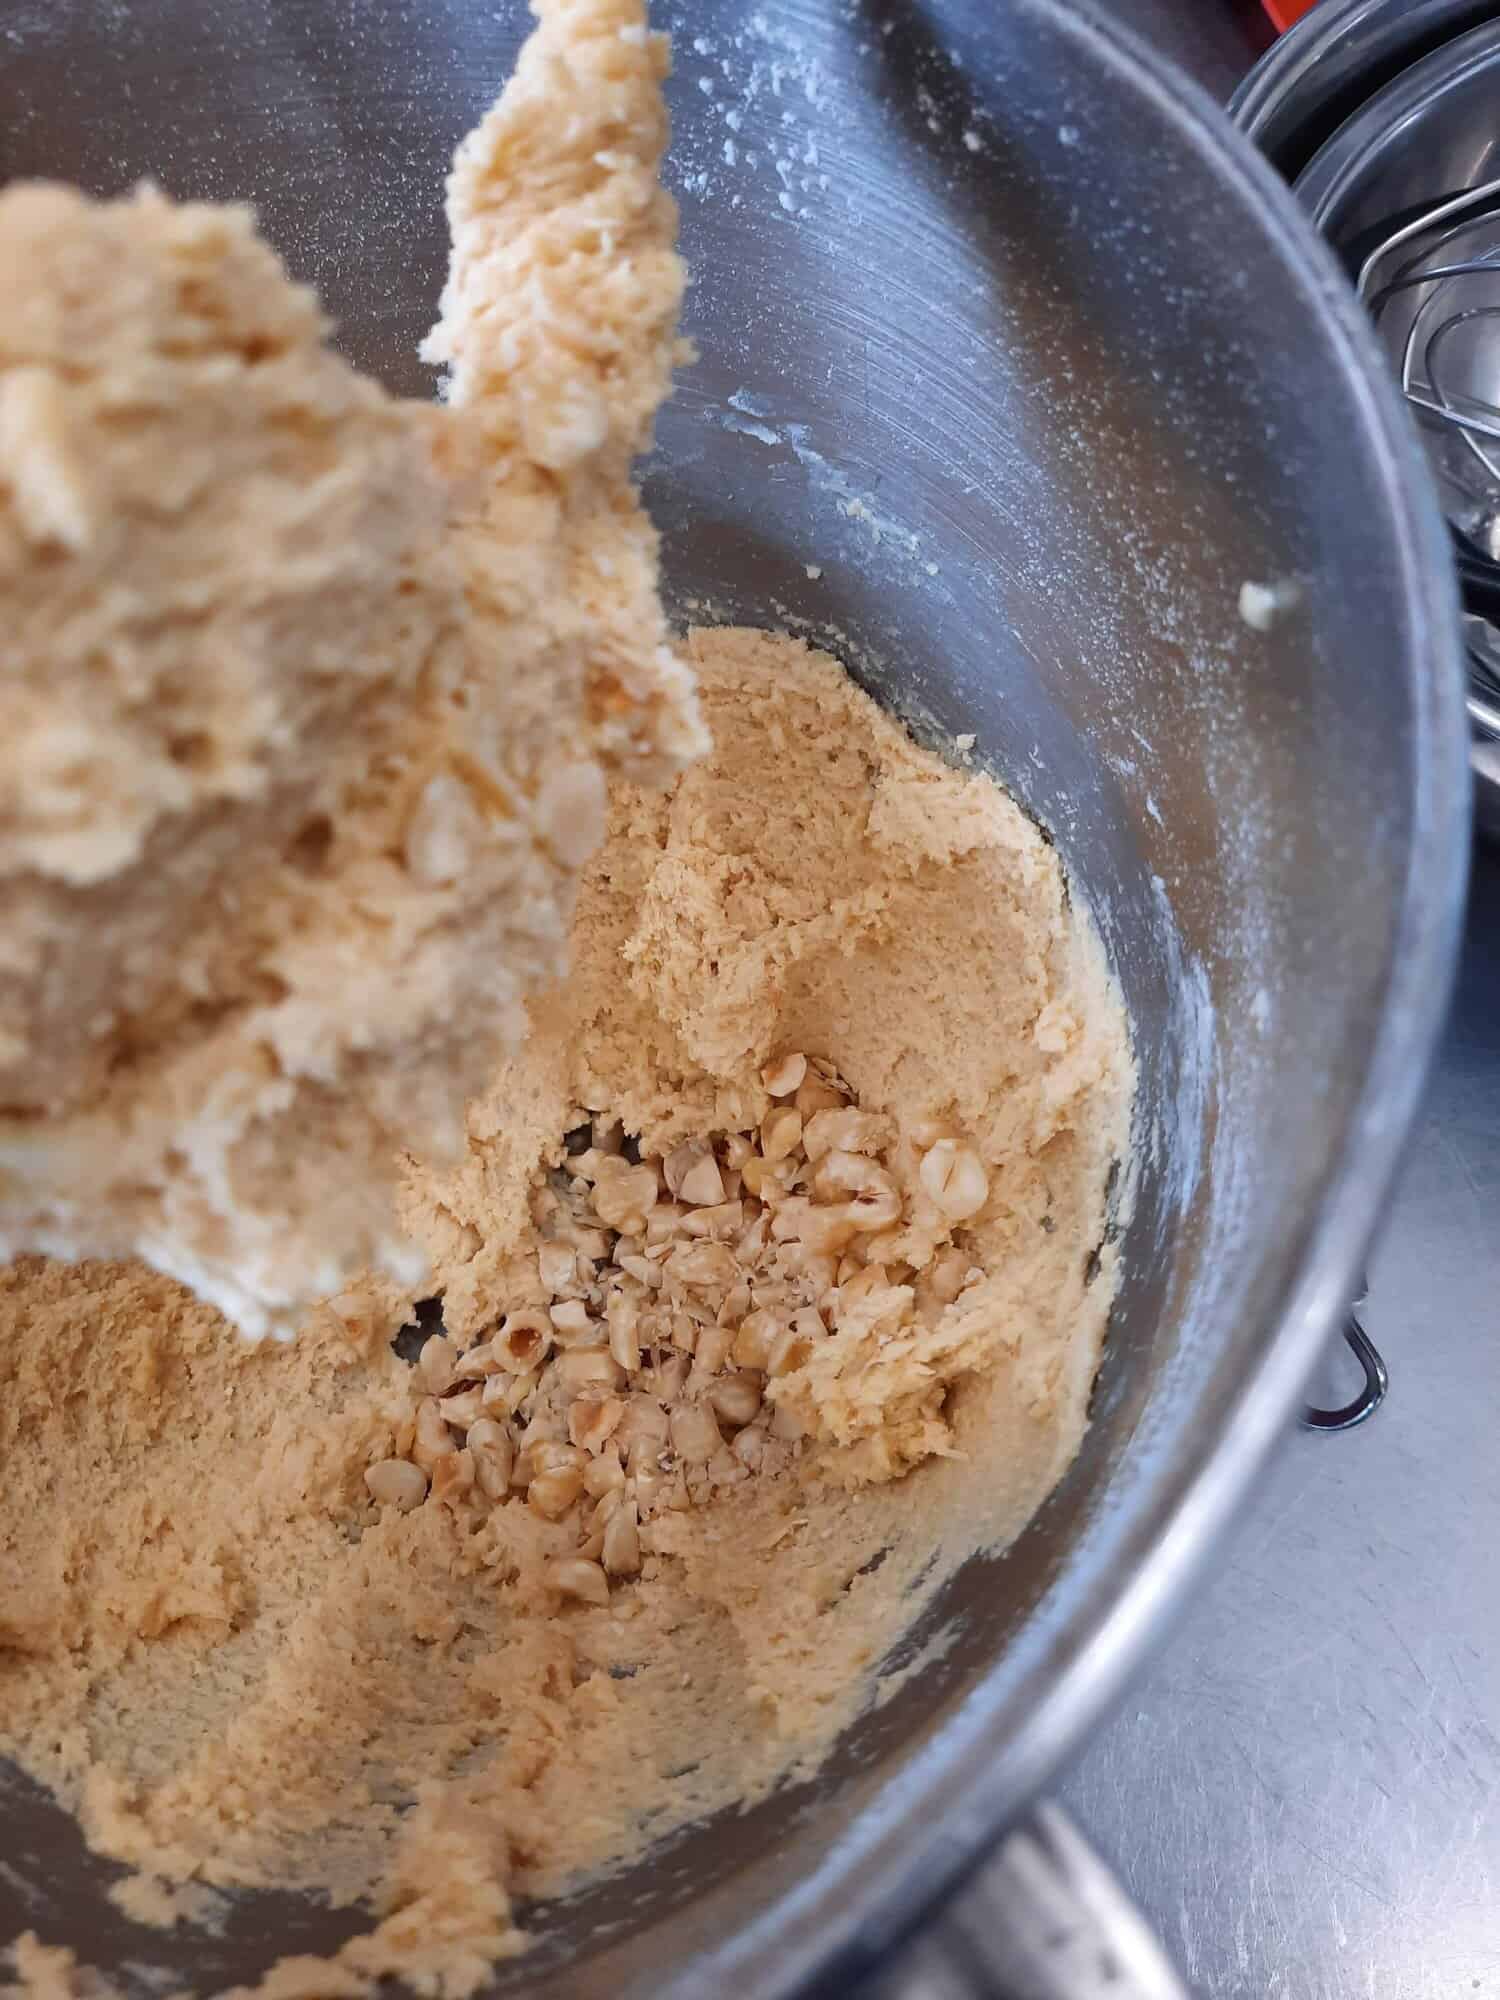 Chop hazelnuts and mix in dough